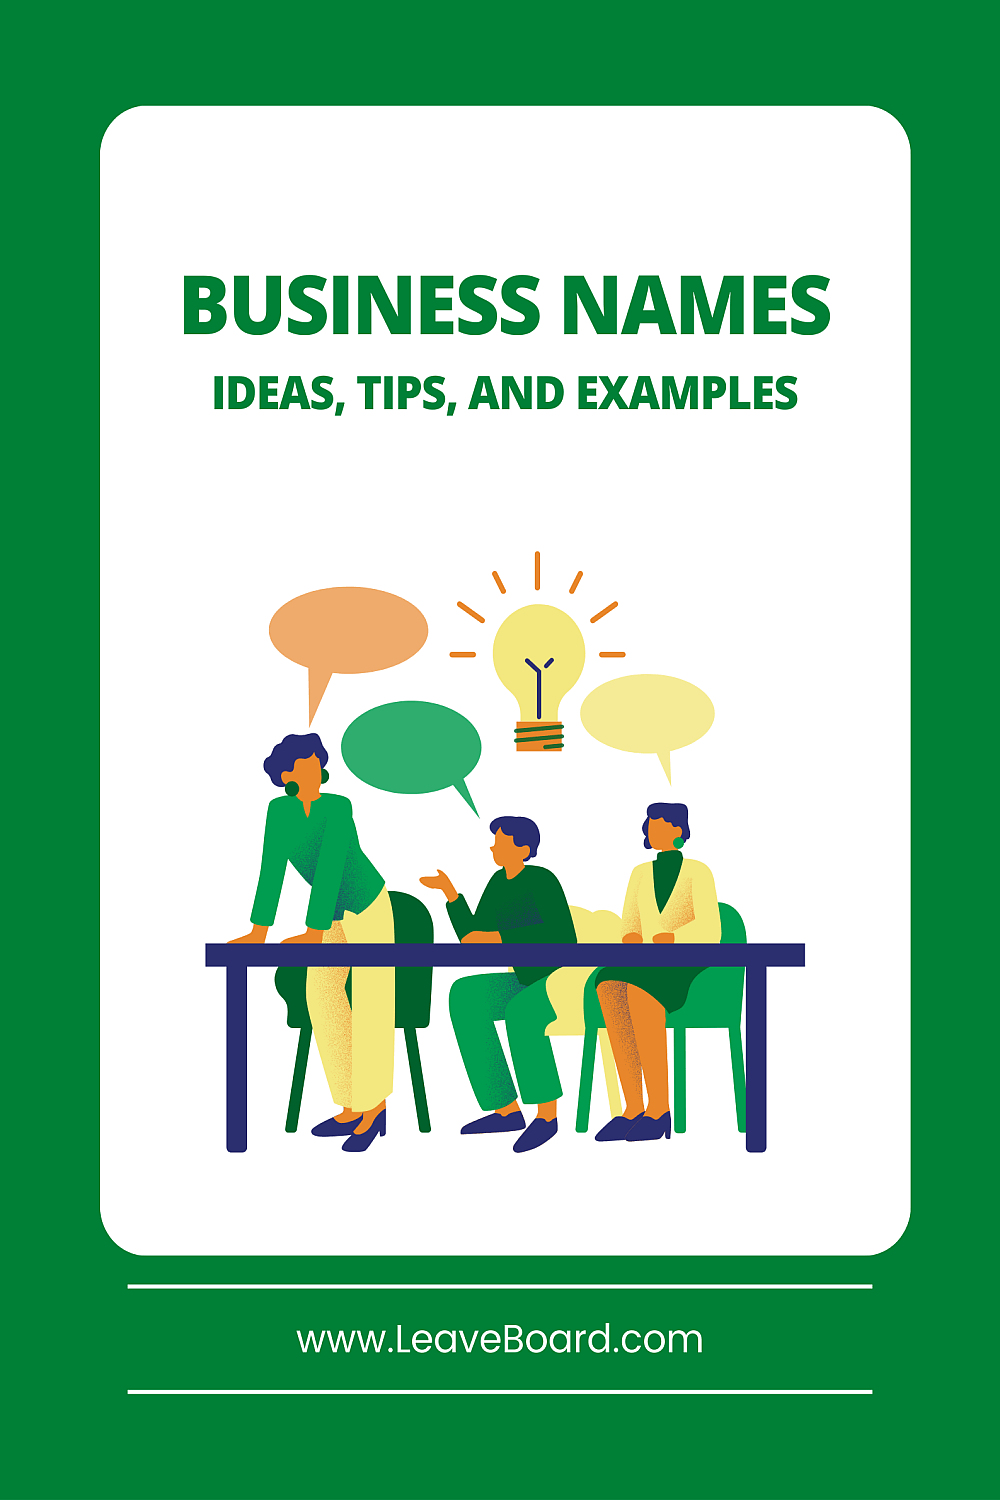 How to Come Up with a Business Name